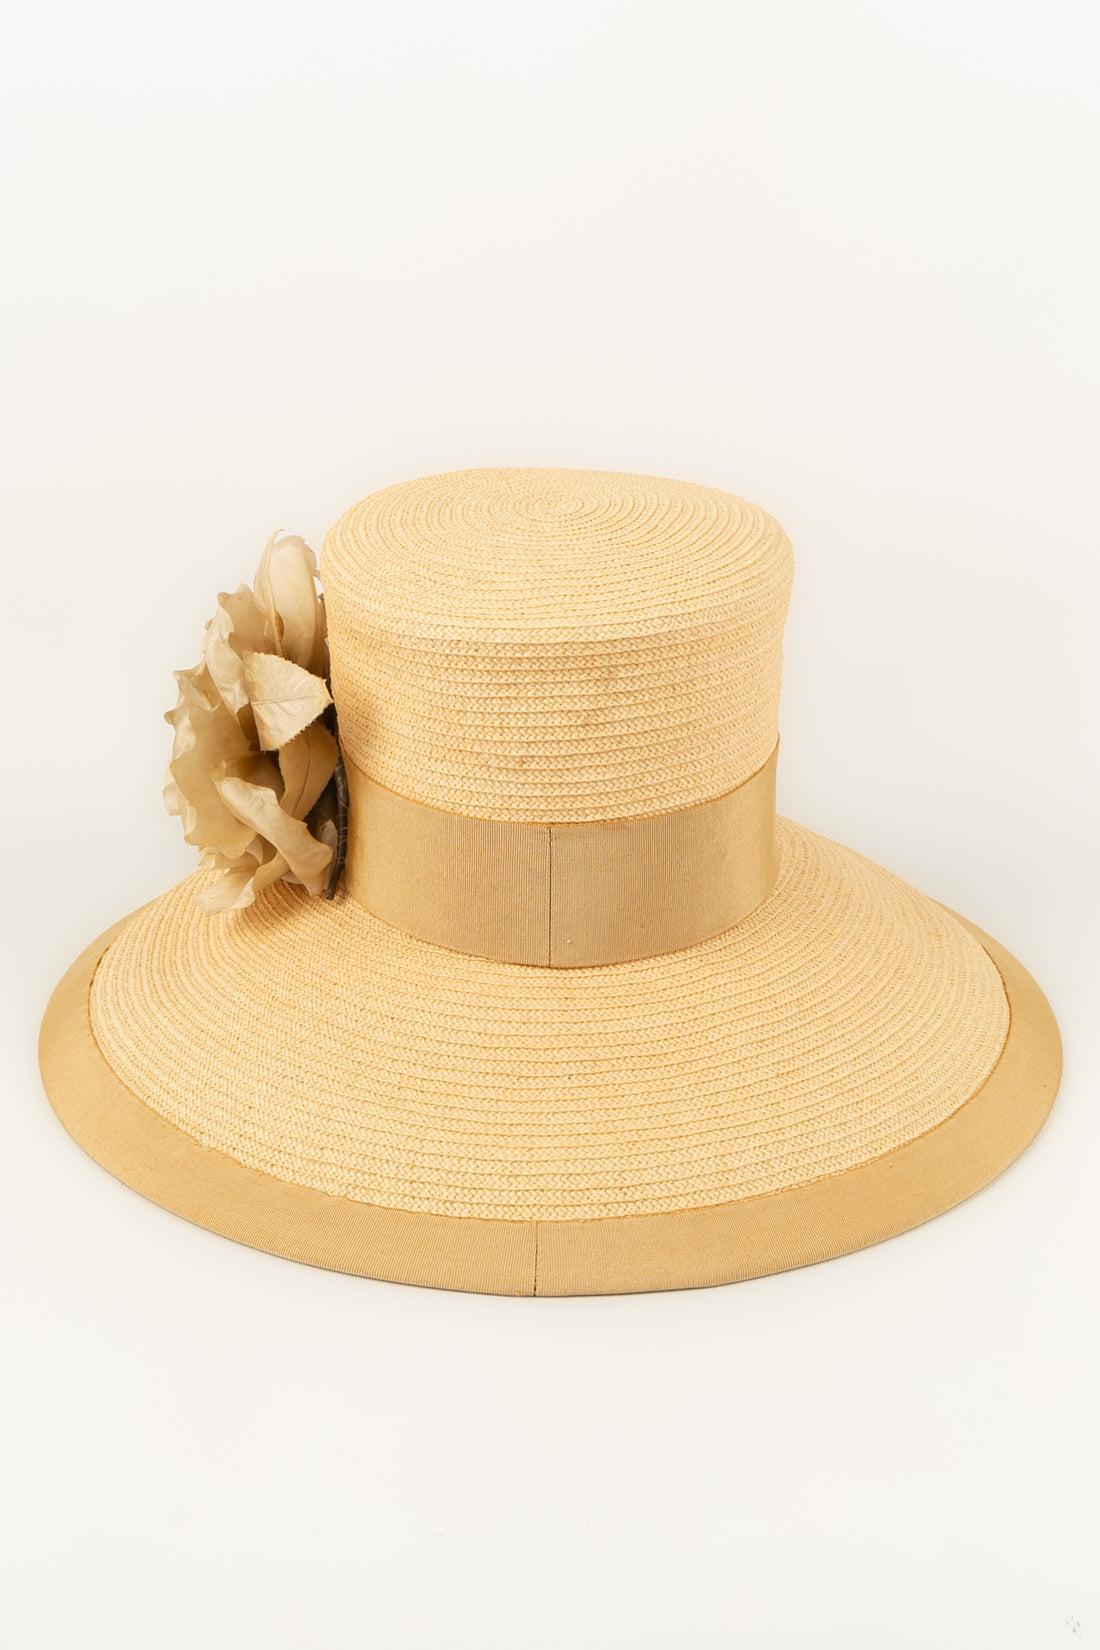 Dior - Natural straw hat / capeline

Additional information: 
Dimensions: Size 57
Condition: Very good condition
Seller Ref number: CHP77